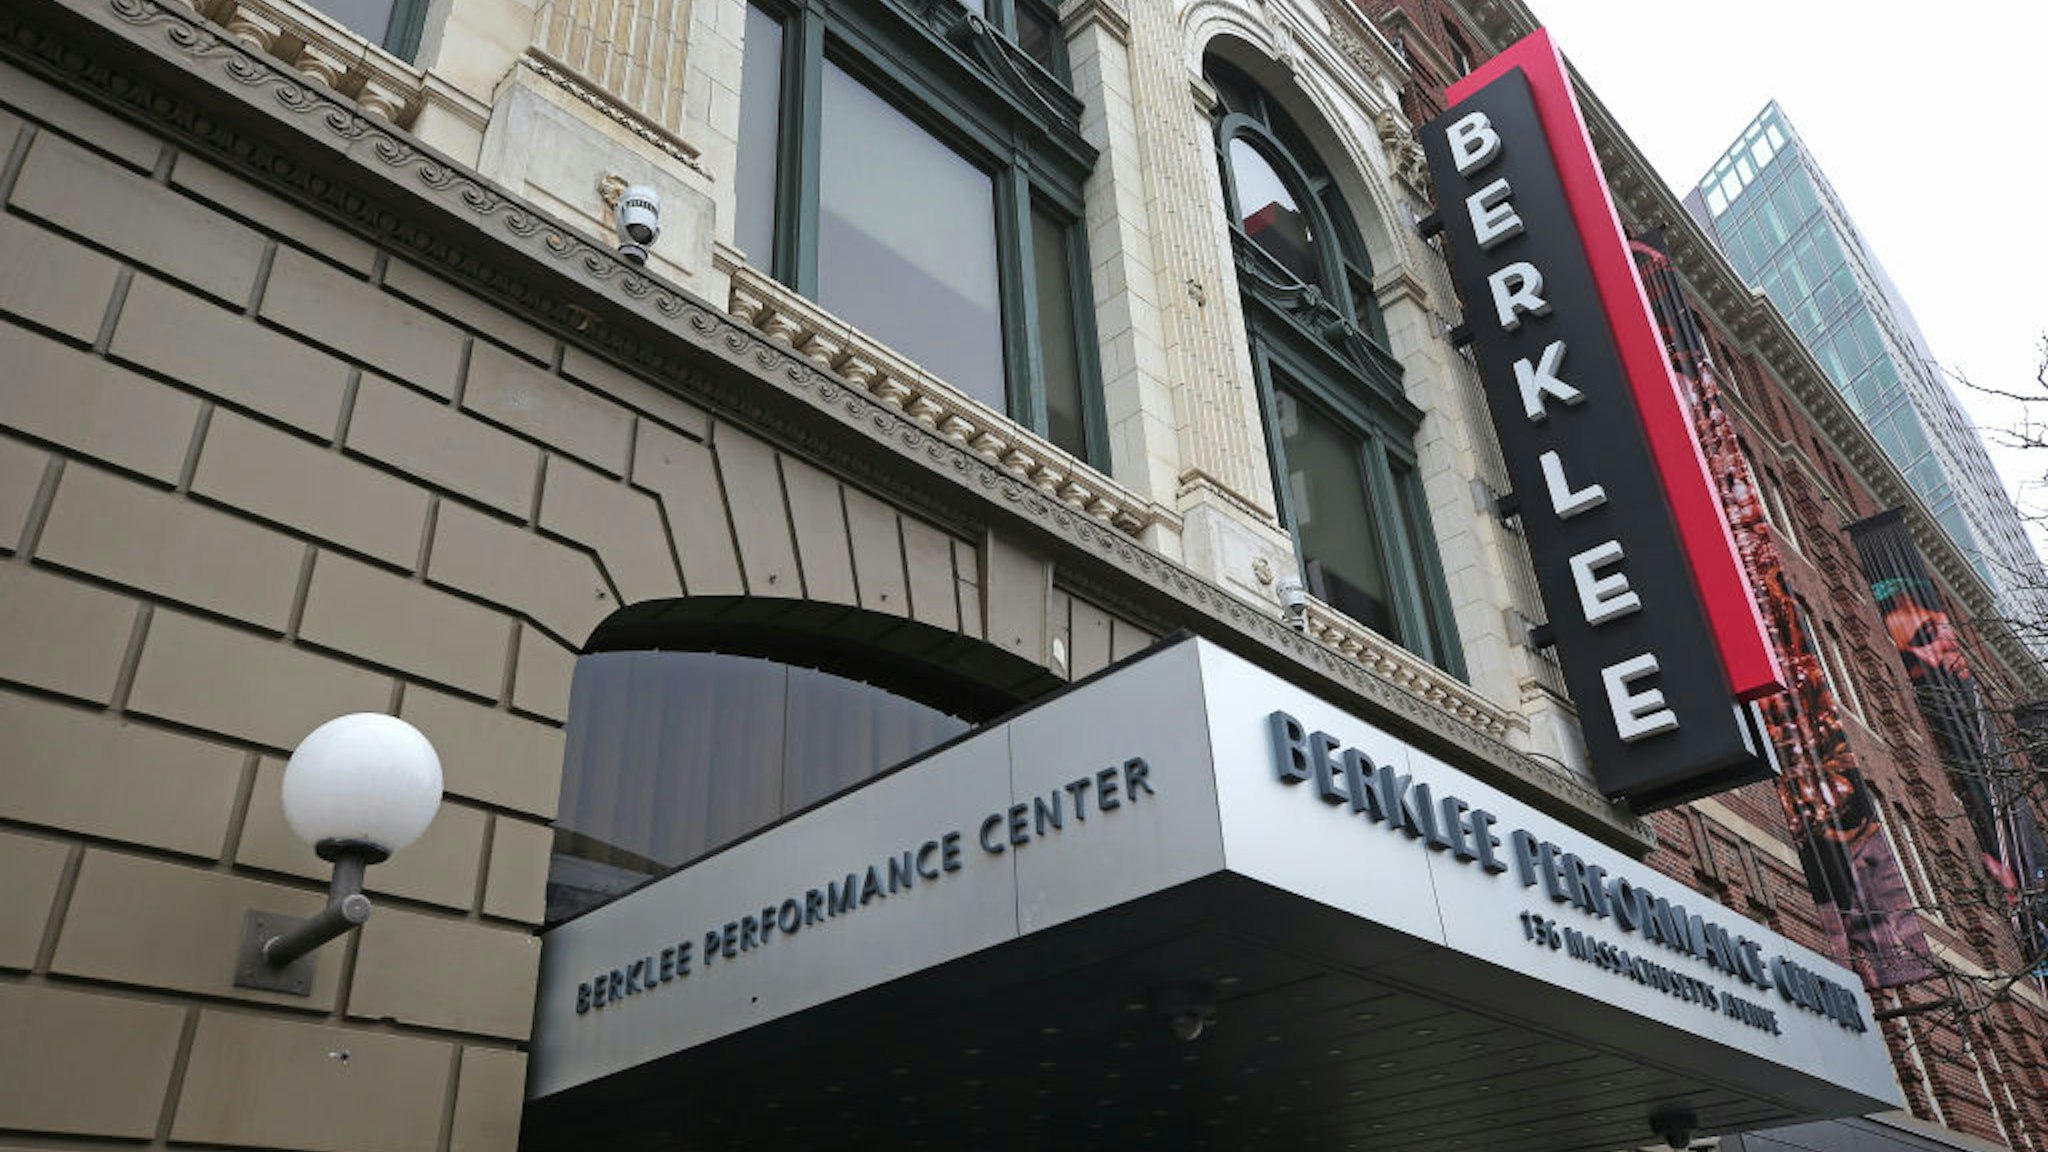 The Berklee Performance Center building at 136 Massachusetts Avenue at the Berklee College of Music campus in Boston is pictured on March 17, 2020.